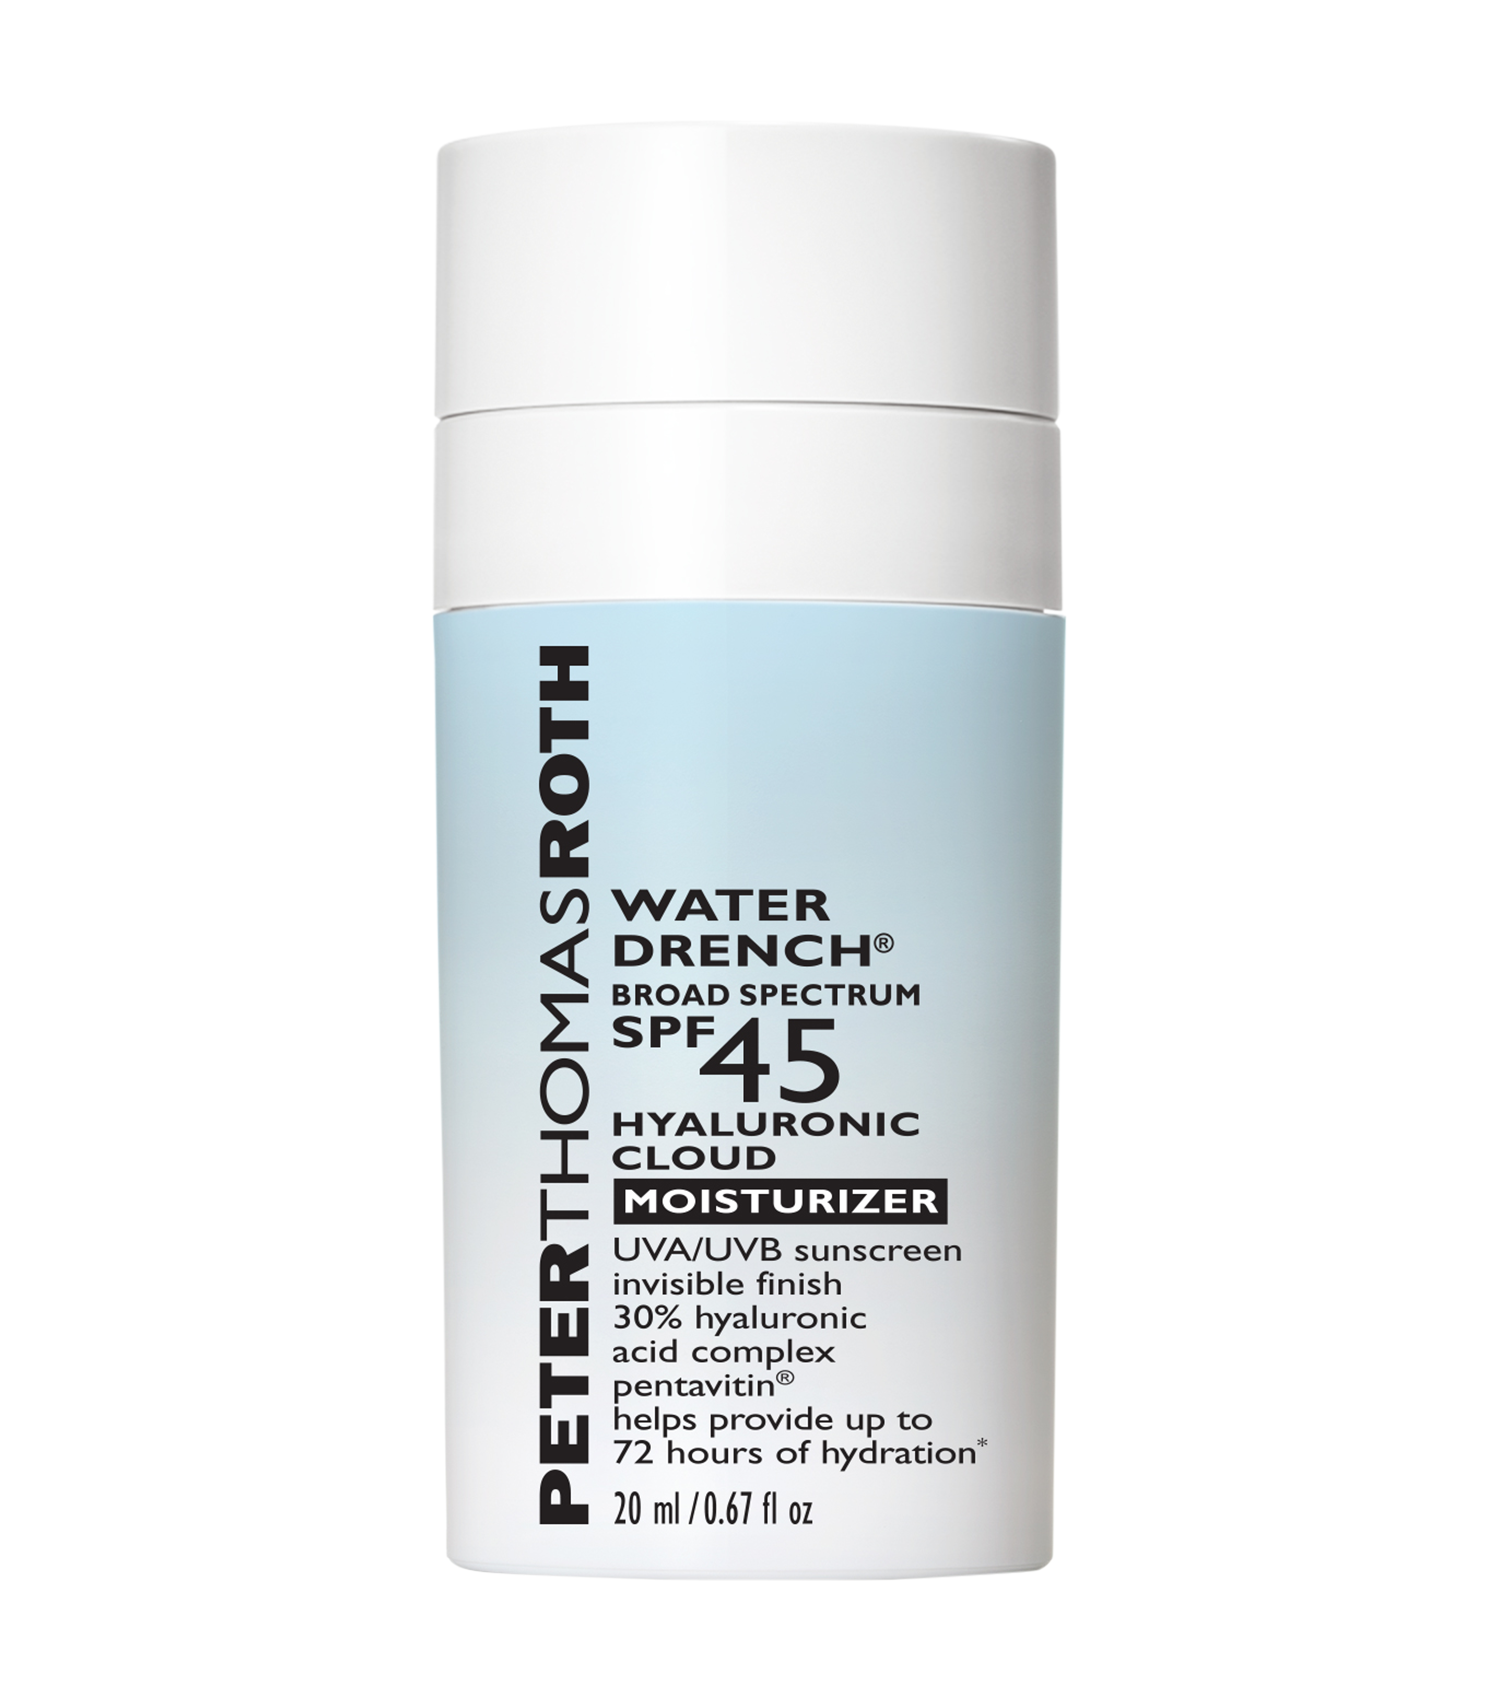 Peter Thomas Roth Travel-Size Water Drench  Broad Spectrum SPF 45 Hyaluronic Cloud Moisturizer